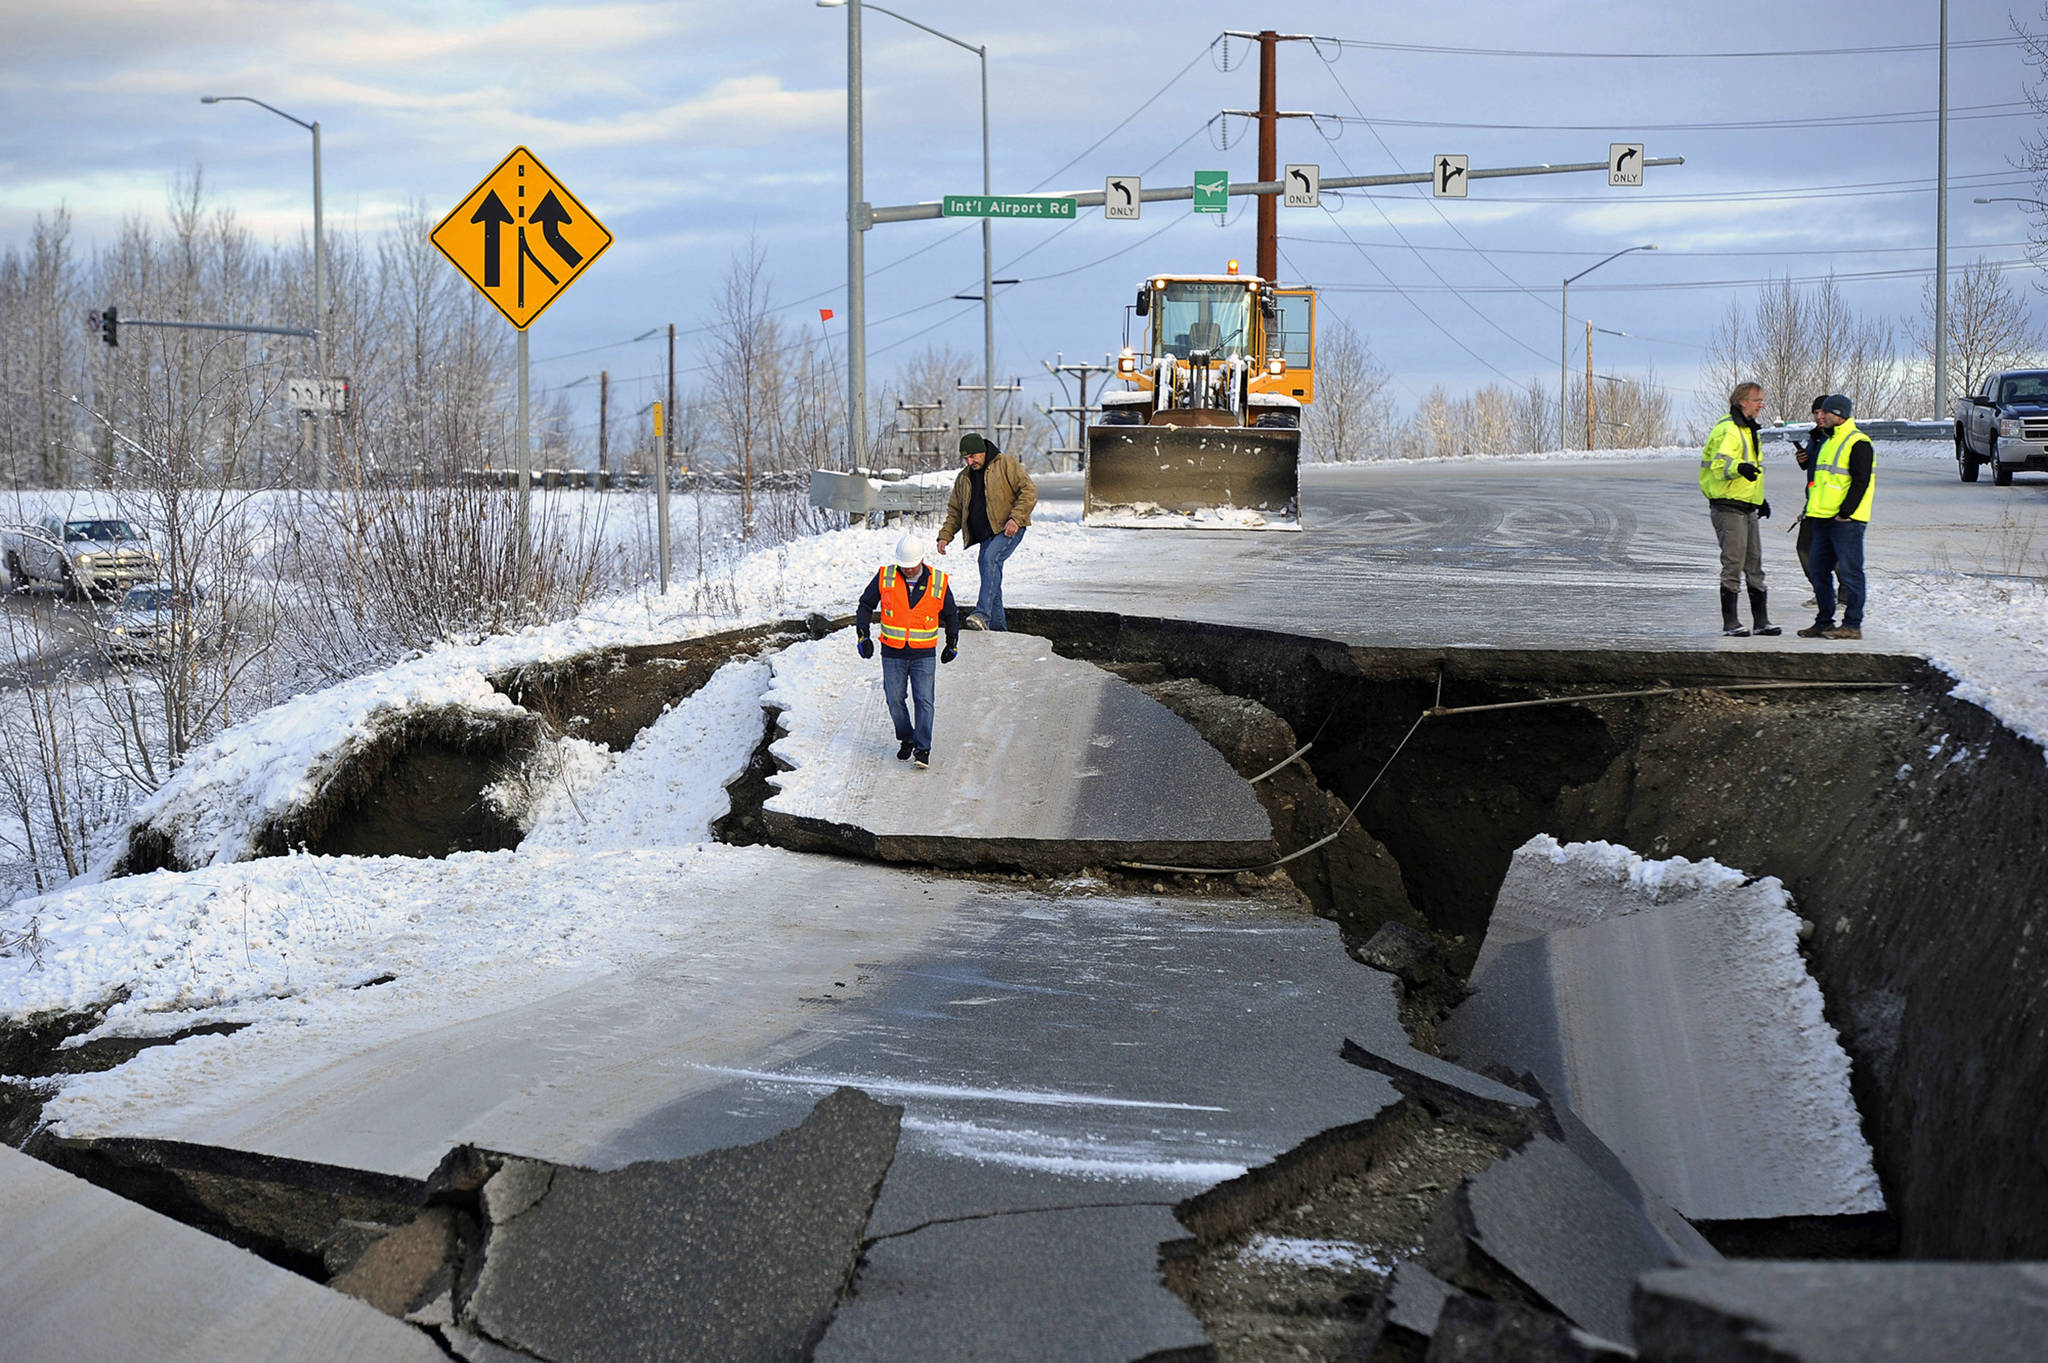 In this Friday, Nov. 30 file photo, workers inspect a road that collapsed during an earthquake in Anchorage. The off-ramp connecting Minnesota Drive and Ted Stevens Anchorage International Airport reopened Tuesday, with shoulder work completed Wednesday. (AP Photo/Mike Dinneen, File)